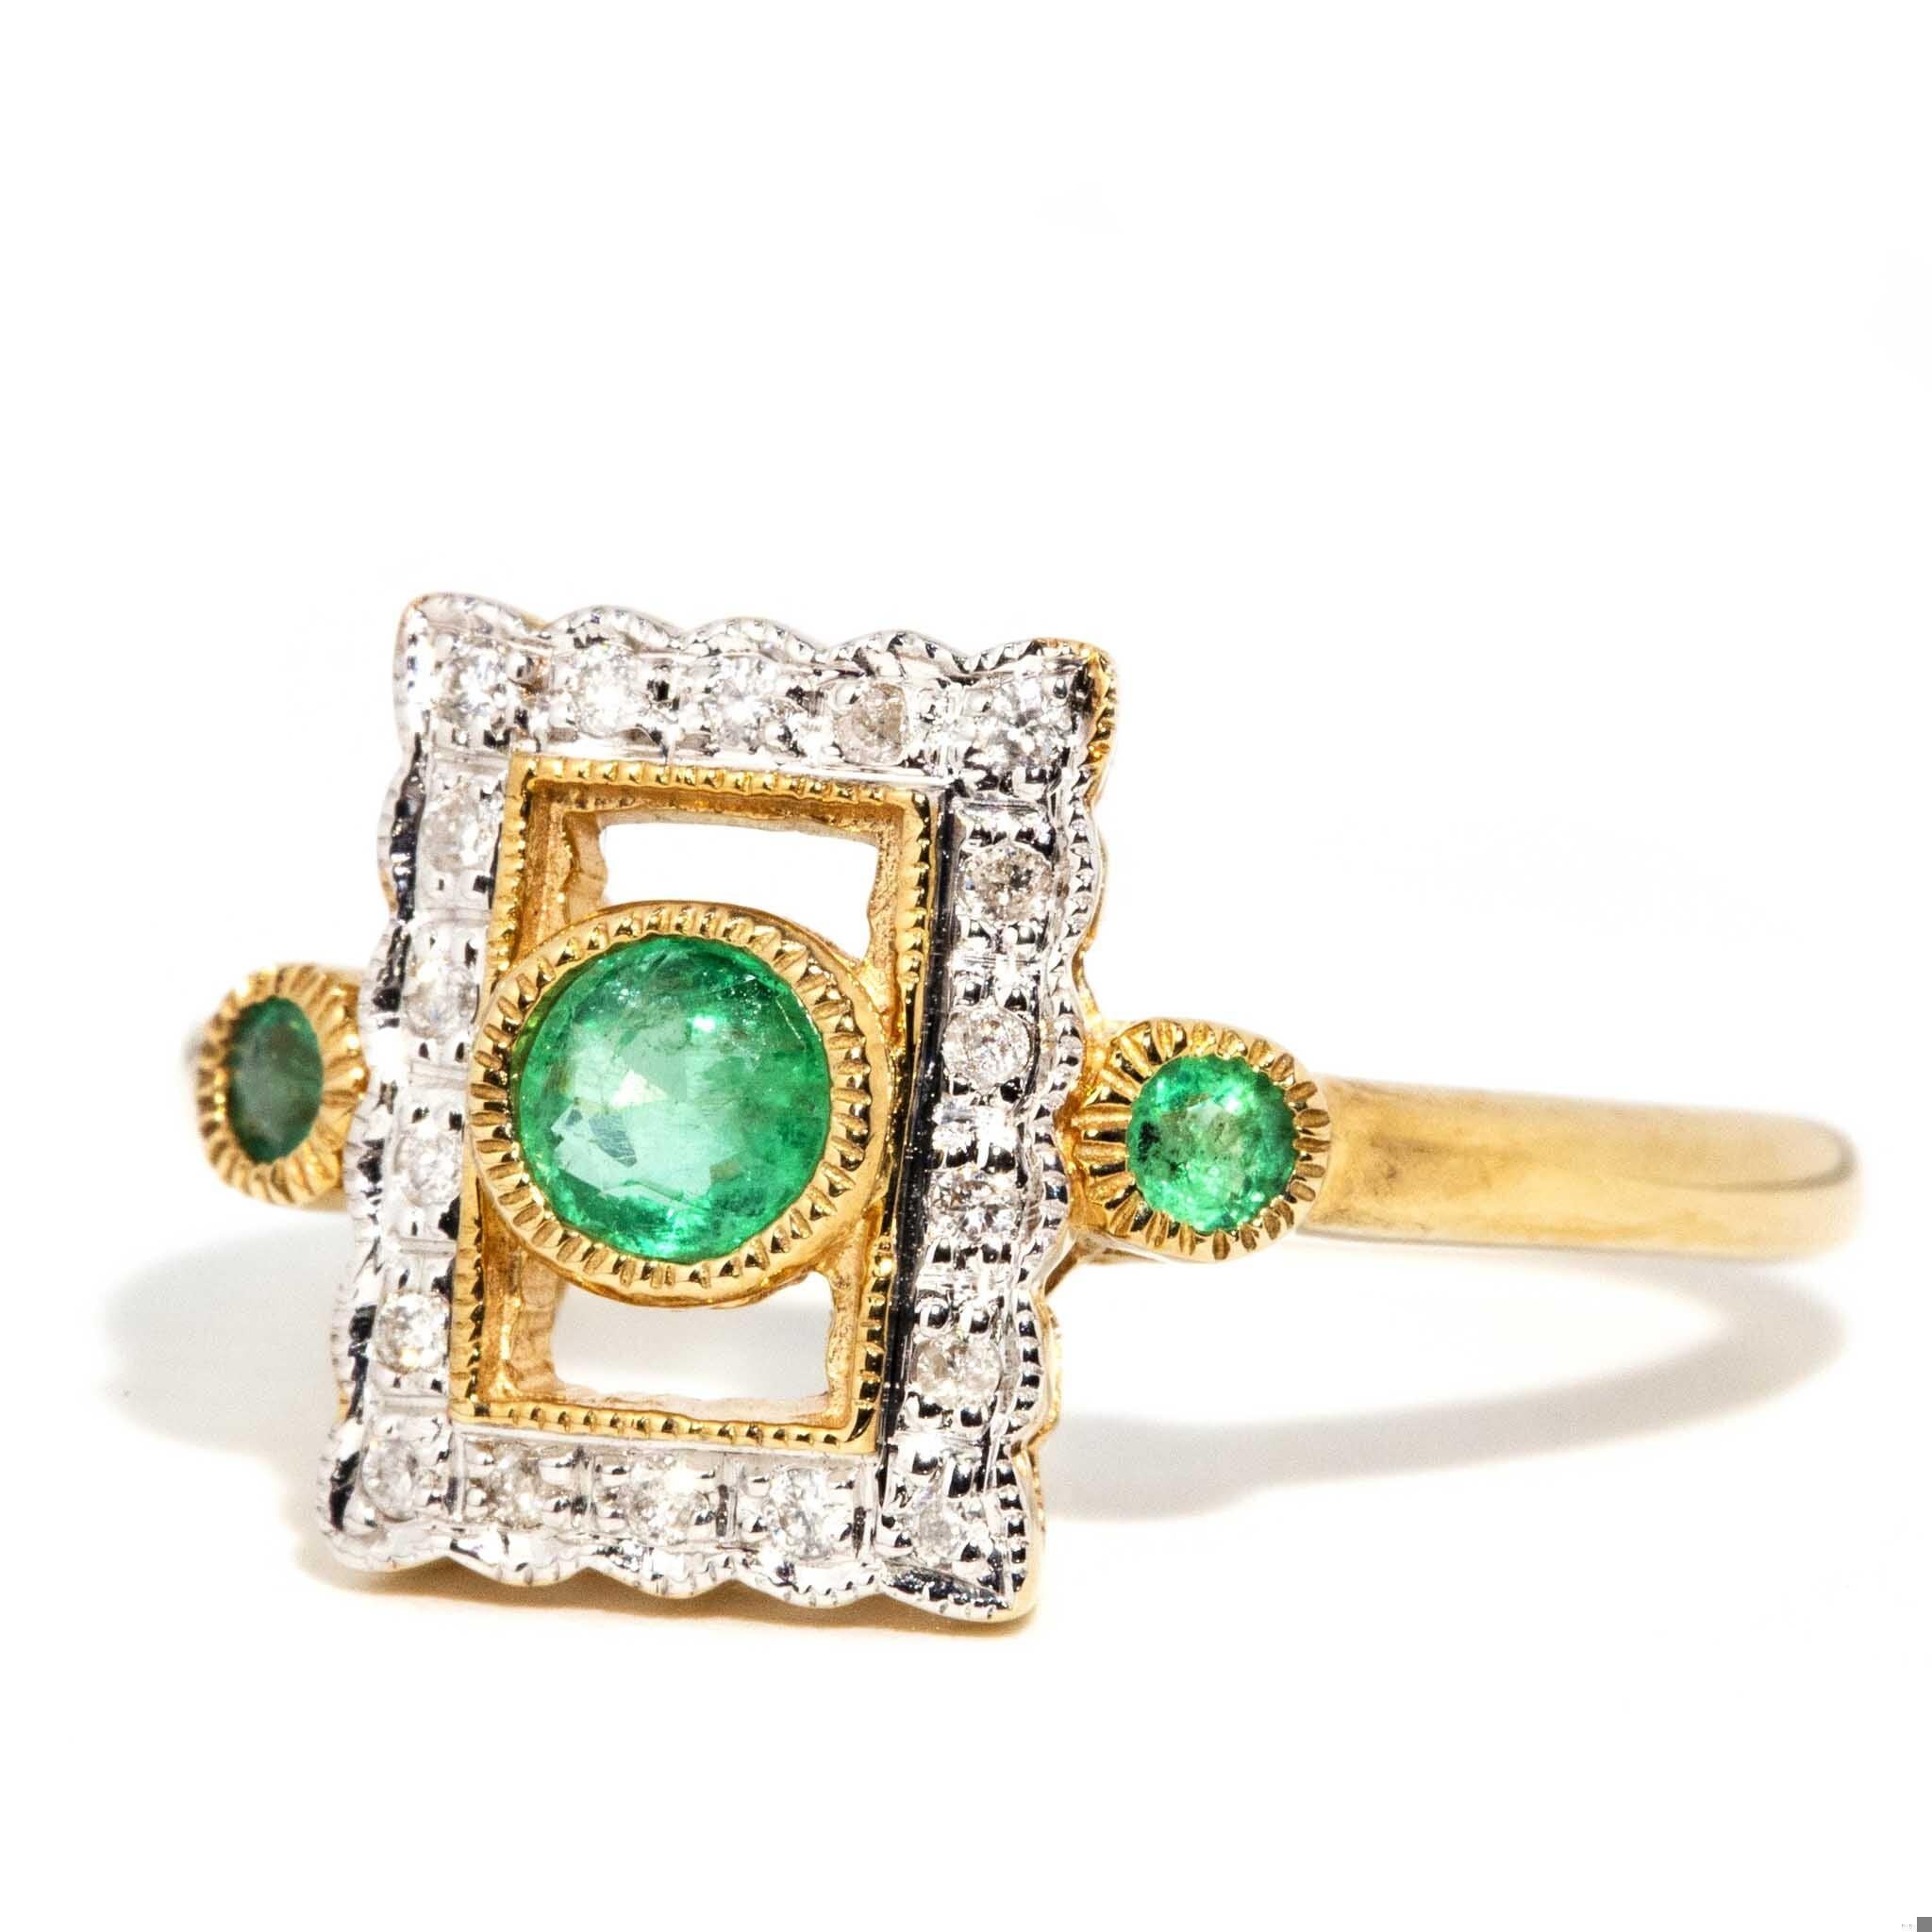 Vintage Inspired Bright Green Emerald & Diamond Ring 9 Carat Yellow Gold In New Condition For Sale In Hamilton, AU